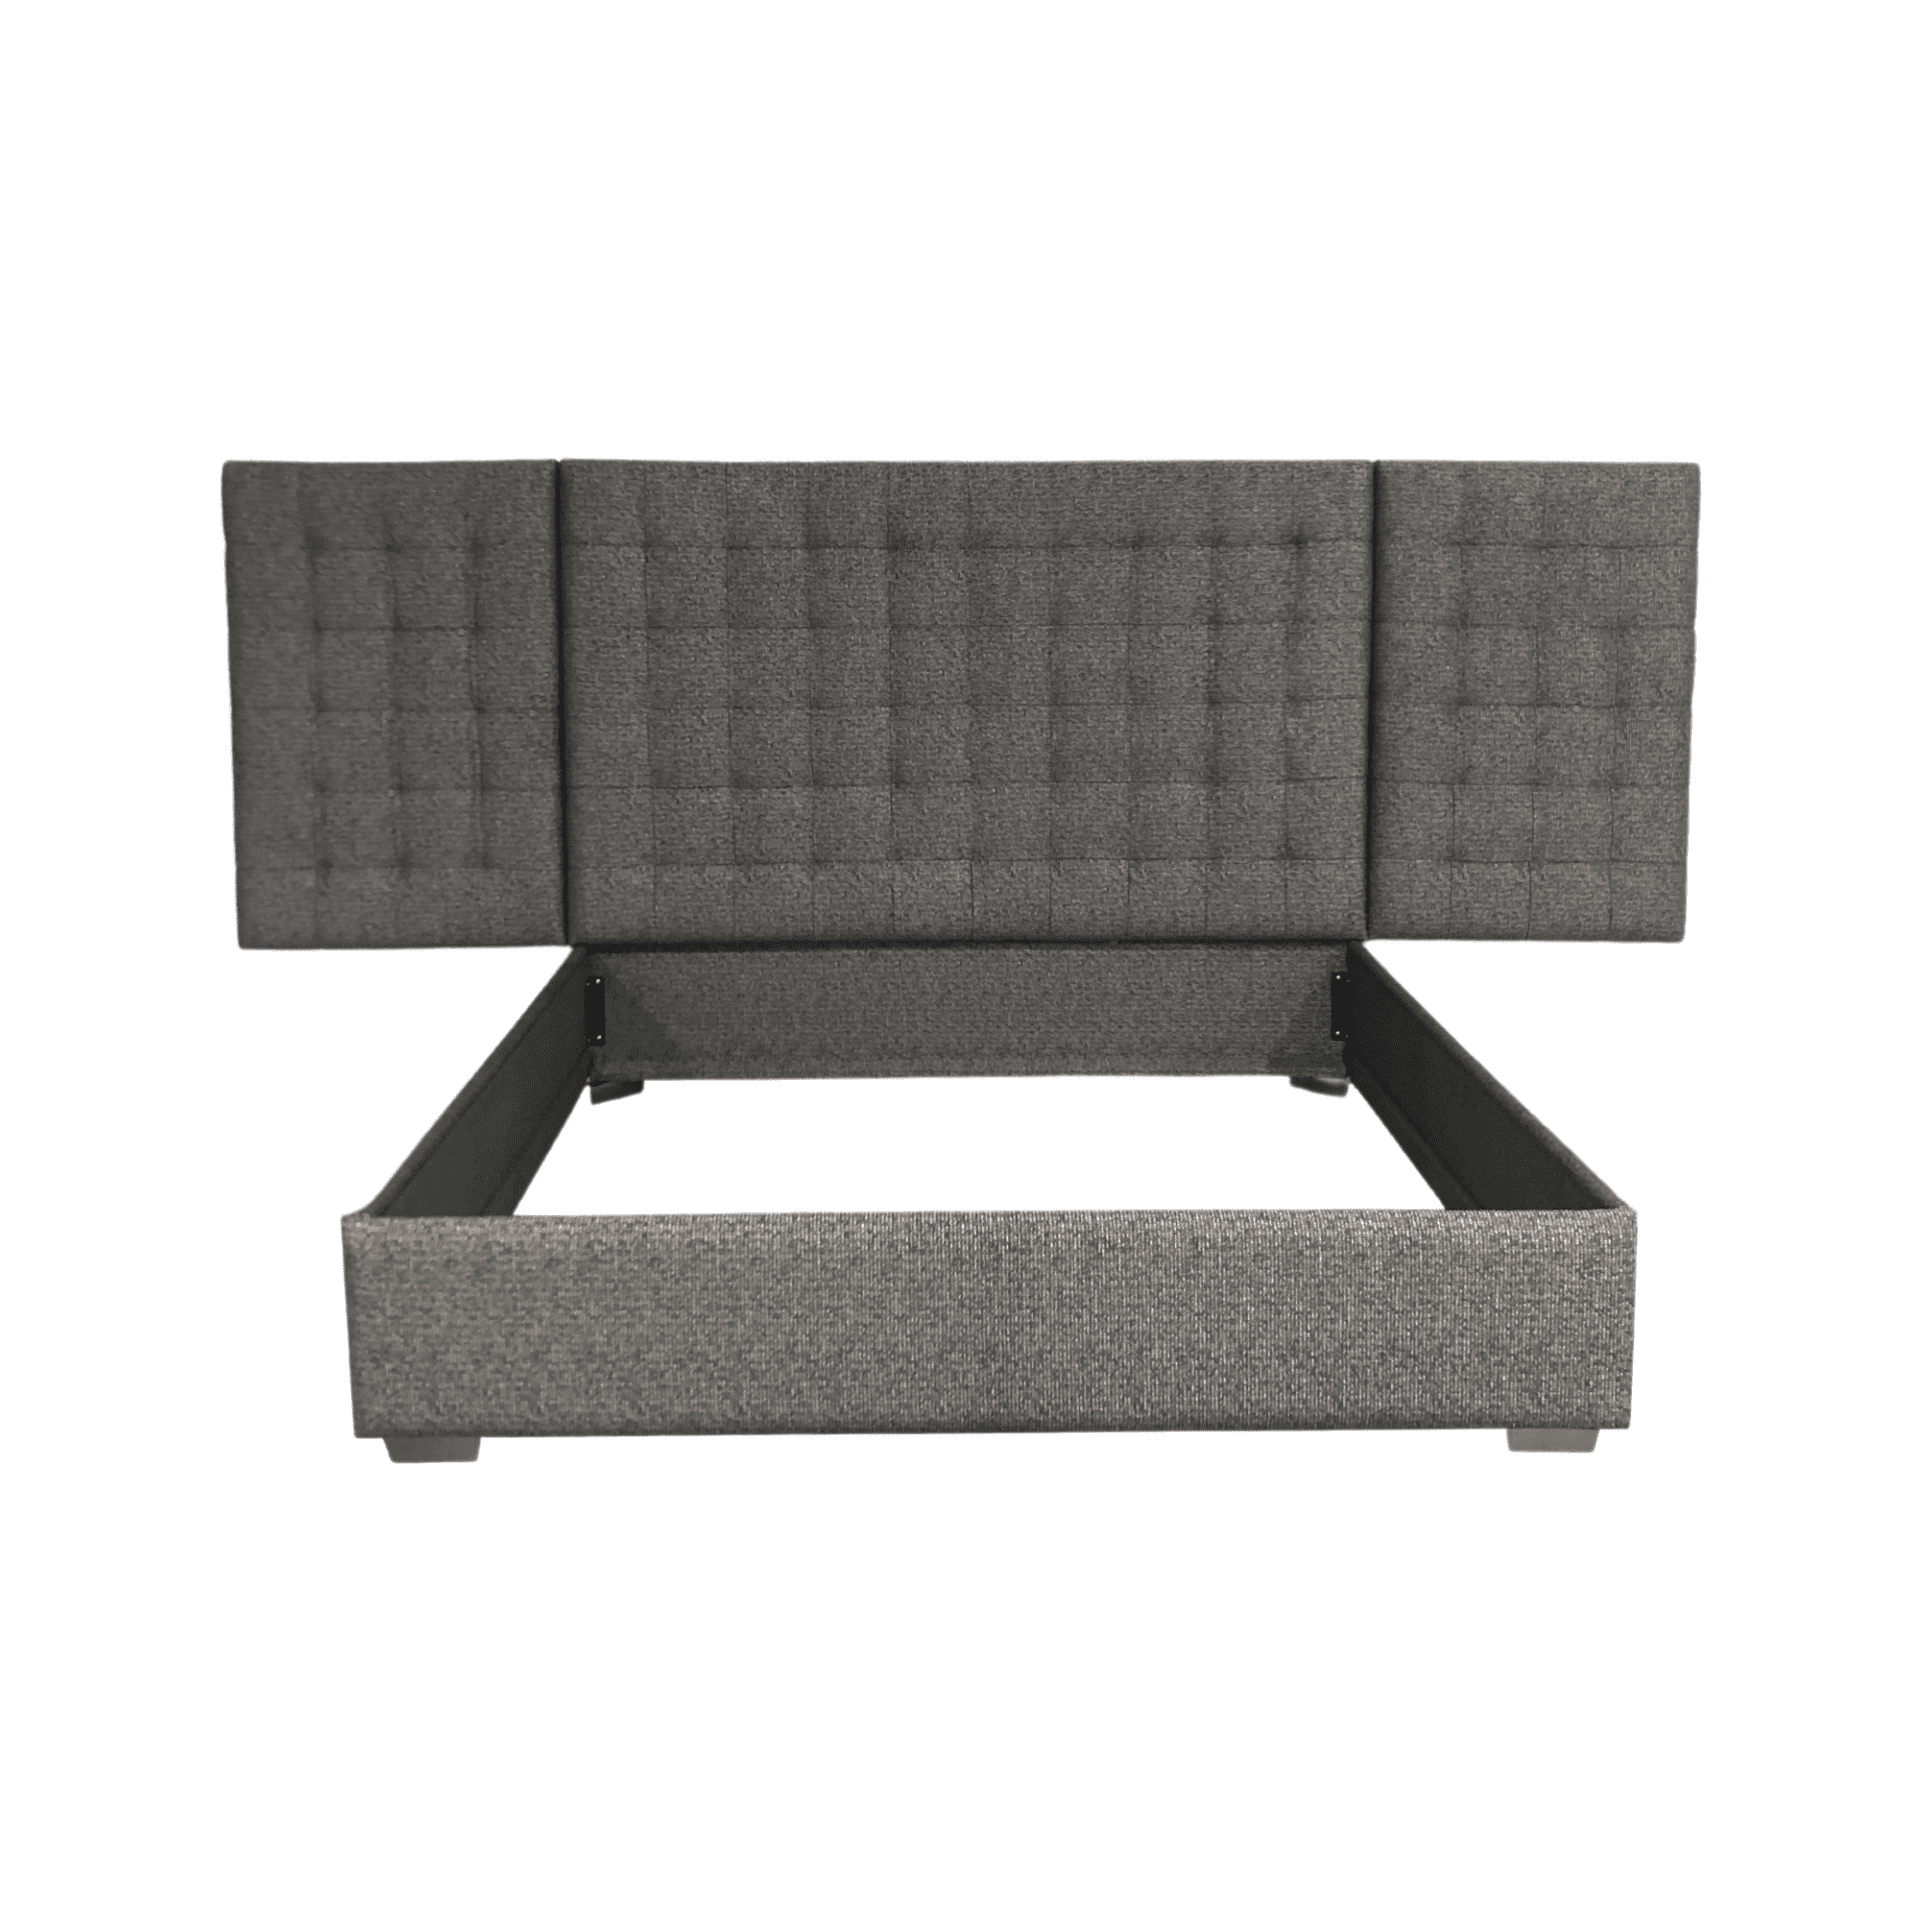 MARTIN Wall Mounted Upholstered Headboard & Bed, Luxury Furniture - Blend Home Furnishings